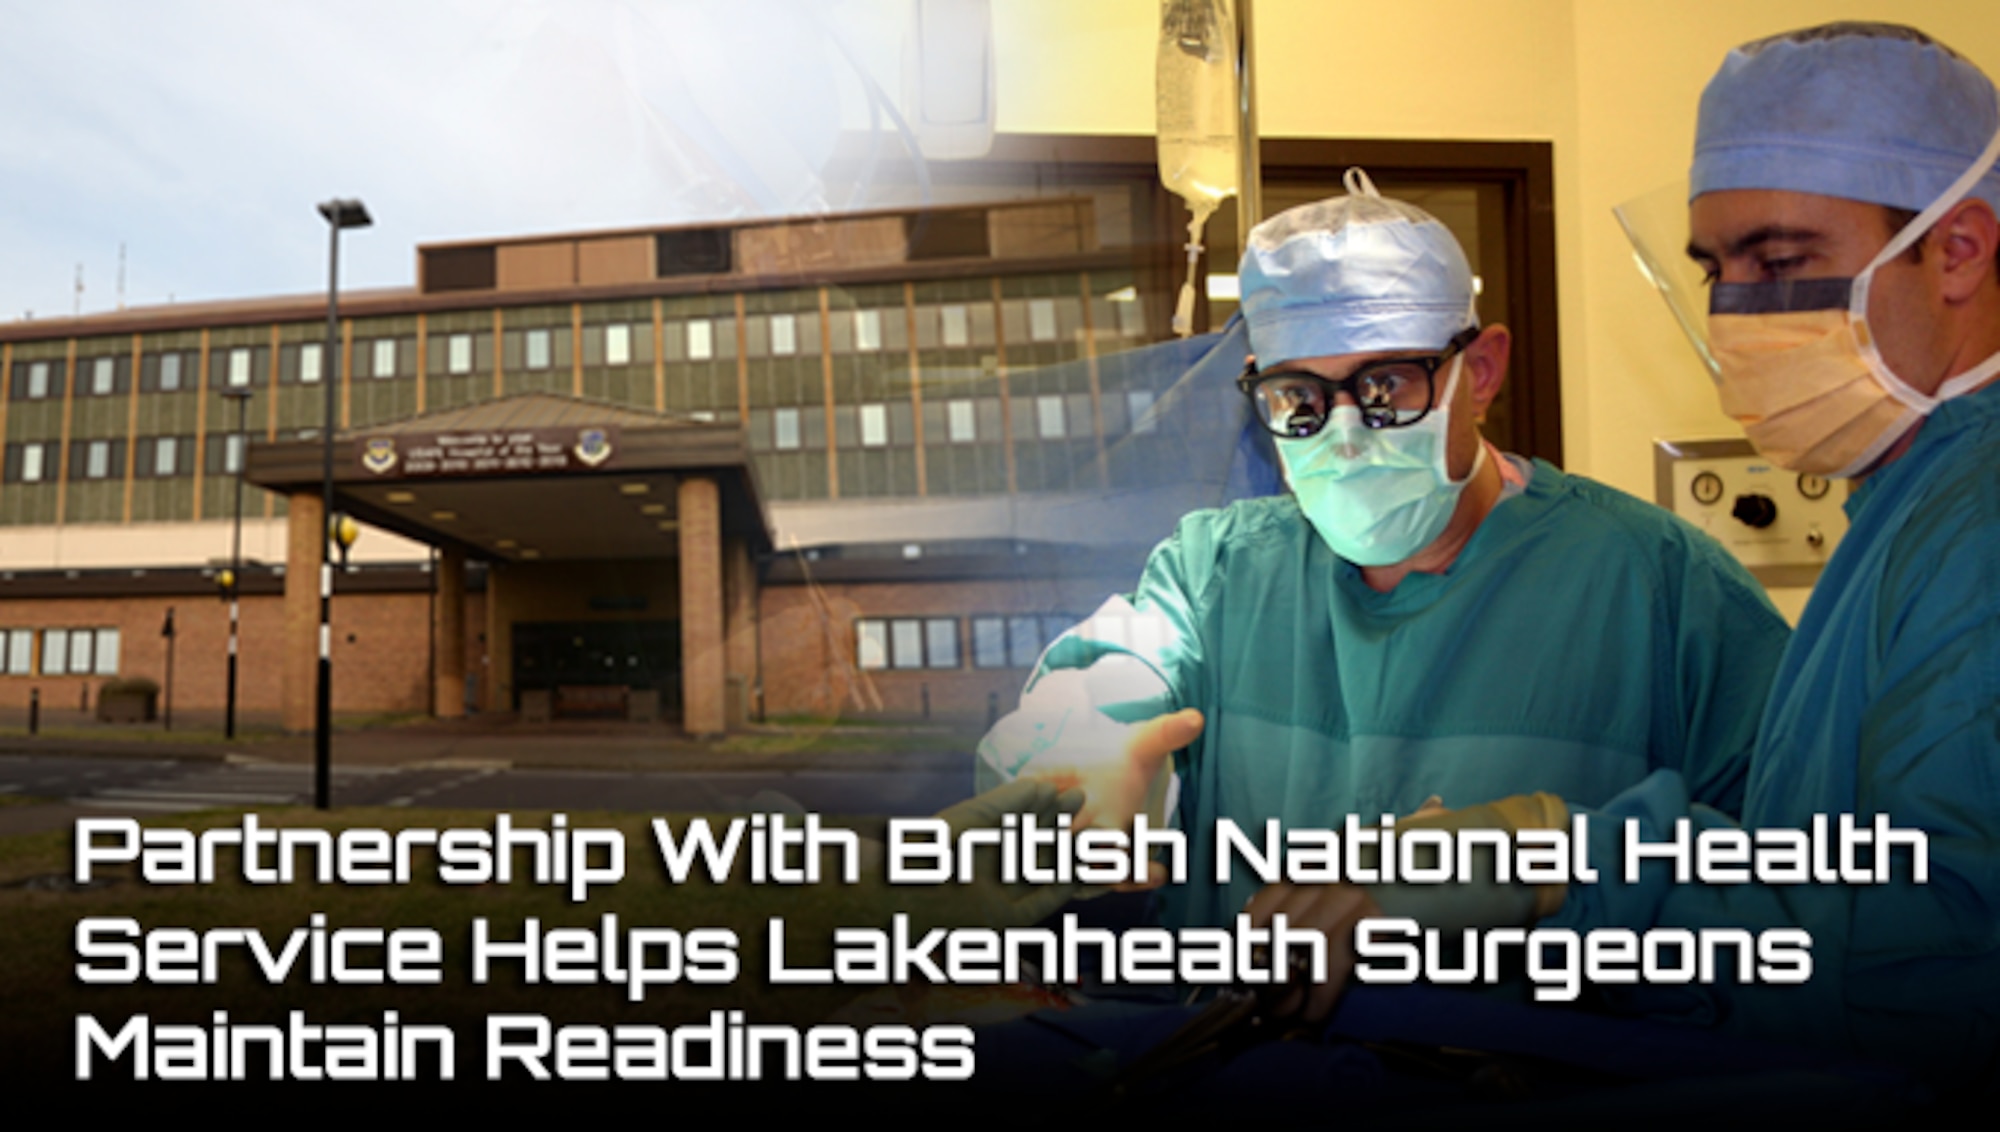 The 48th Medical Group, based at RAF Lakenheath in the U.K., maintains partnerships with three hospitals in the British National Health System. These partnerships allow 48th MDG medical staff to maintain readiness and currency in surgical techniques seen less frequently at Lakenheath, especially trauma care similar to battlefield medicine.